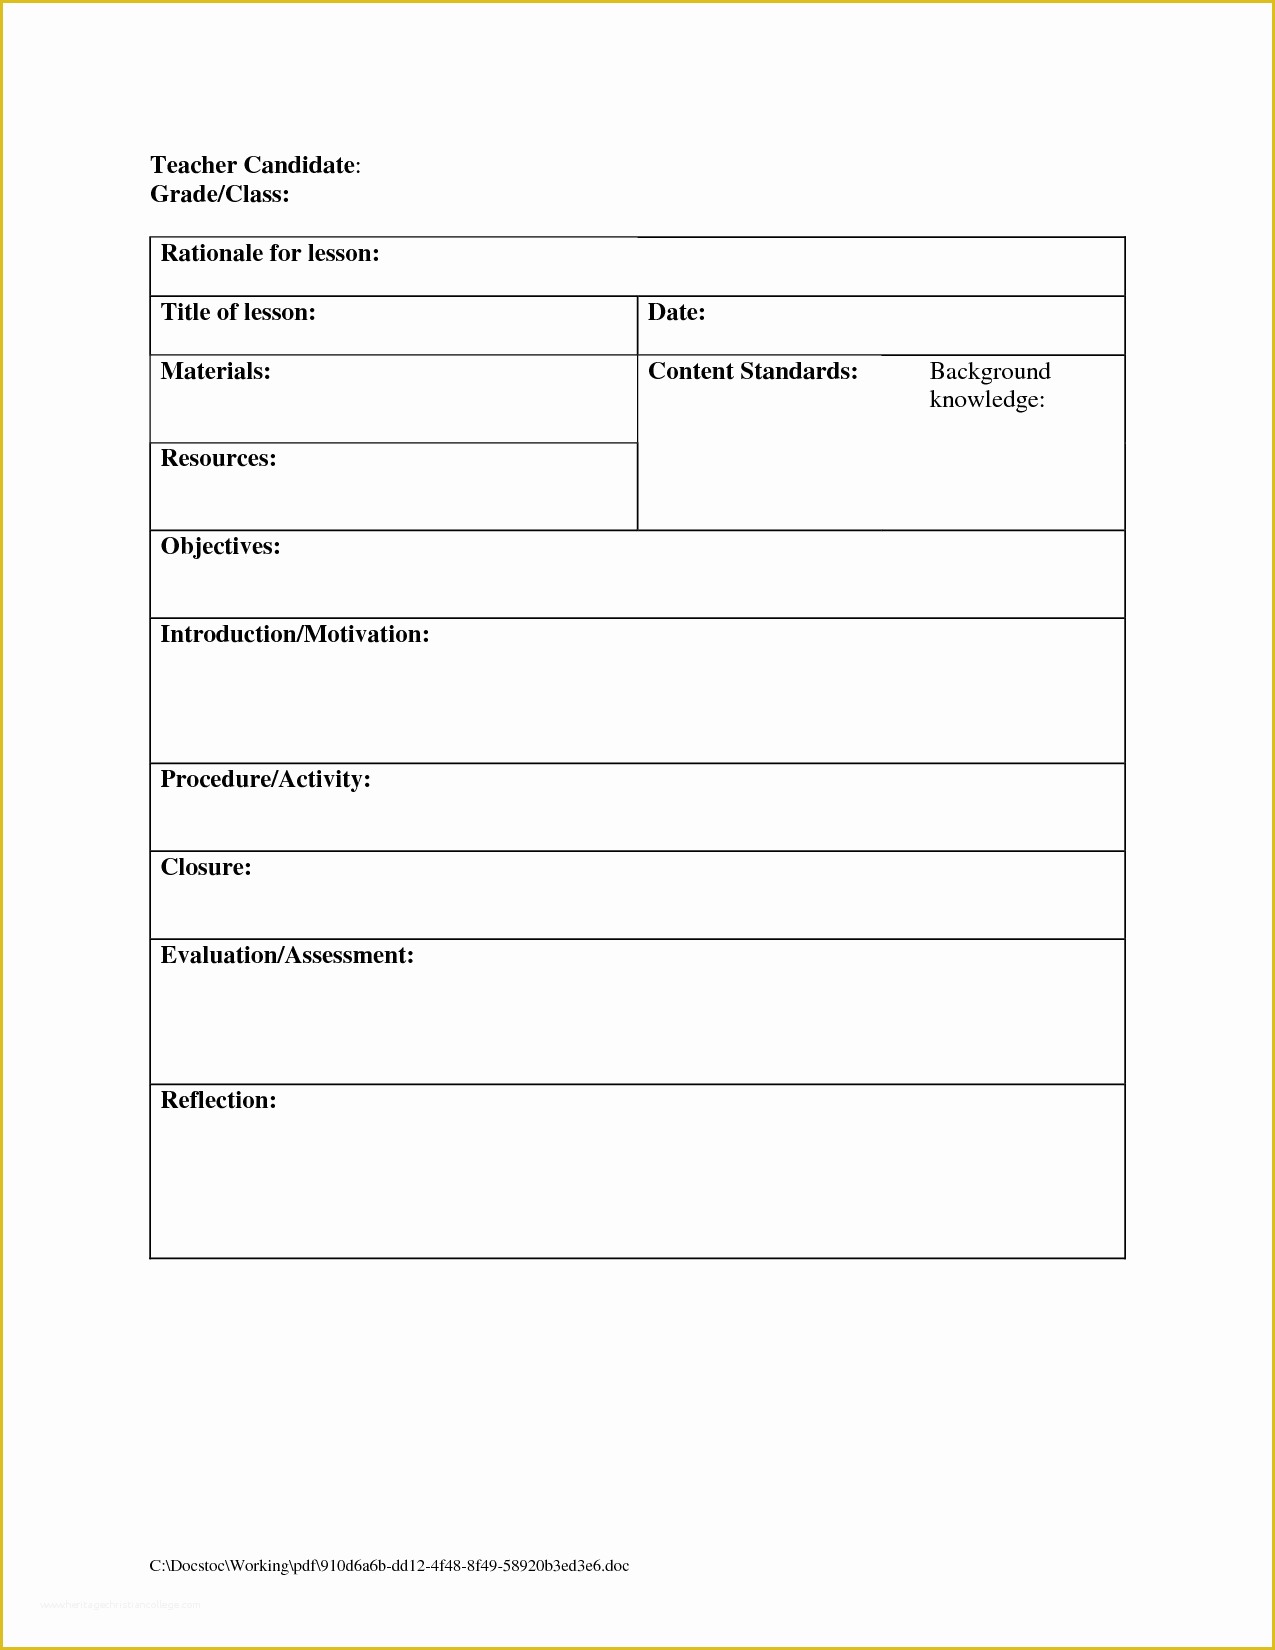 Free Printable Lesson Plan Template Of Printable Blank Lesson Plans form for Counselors